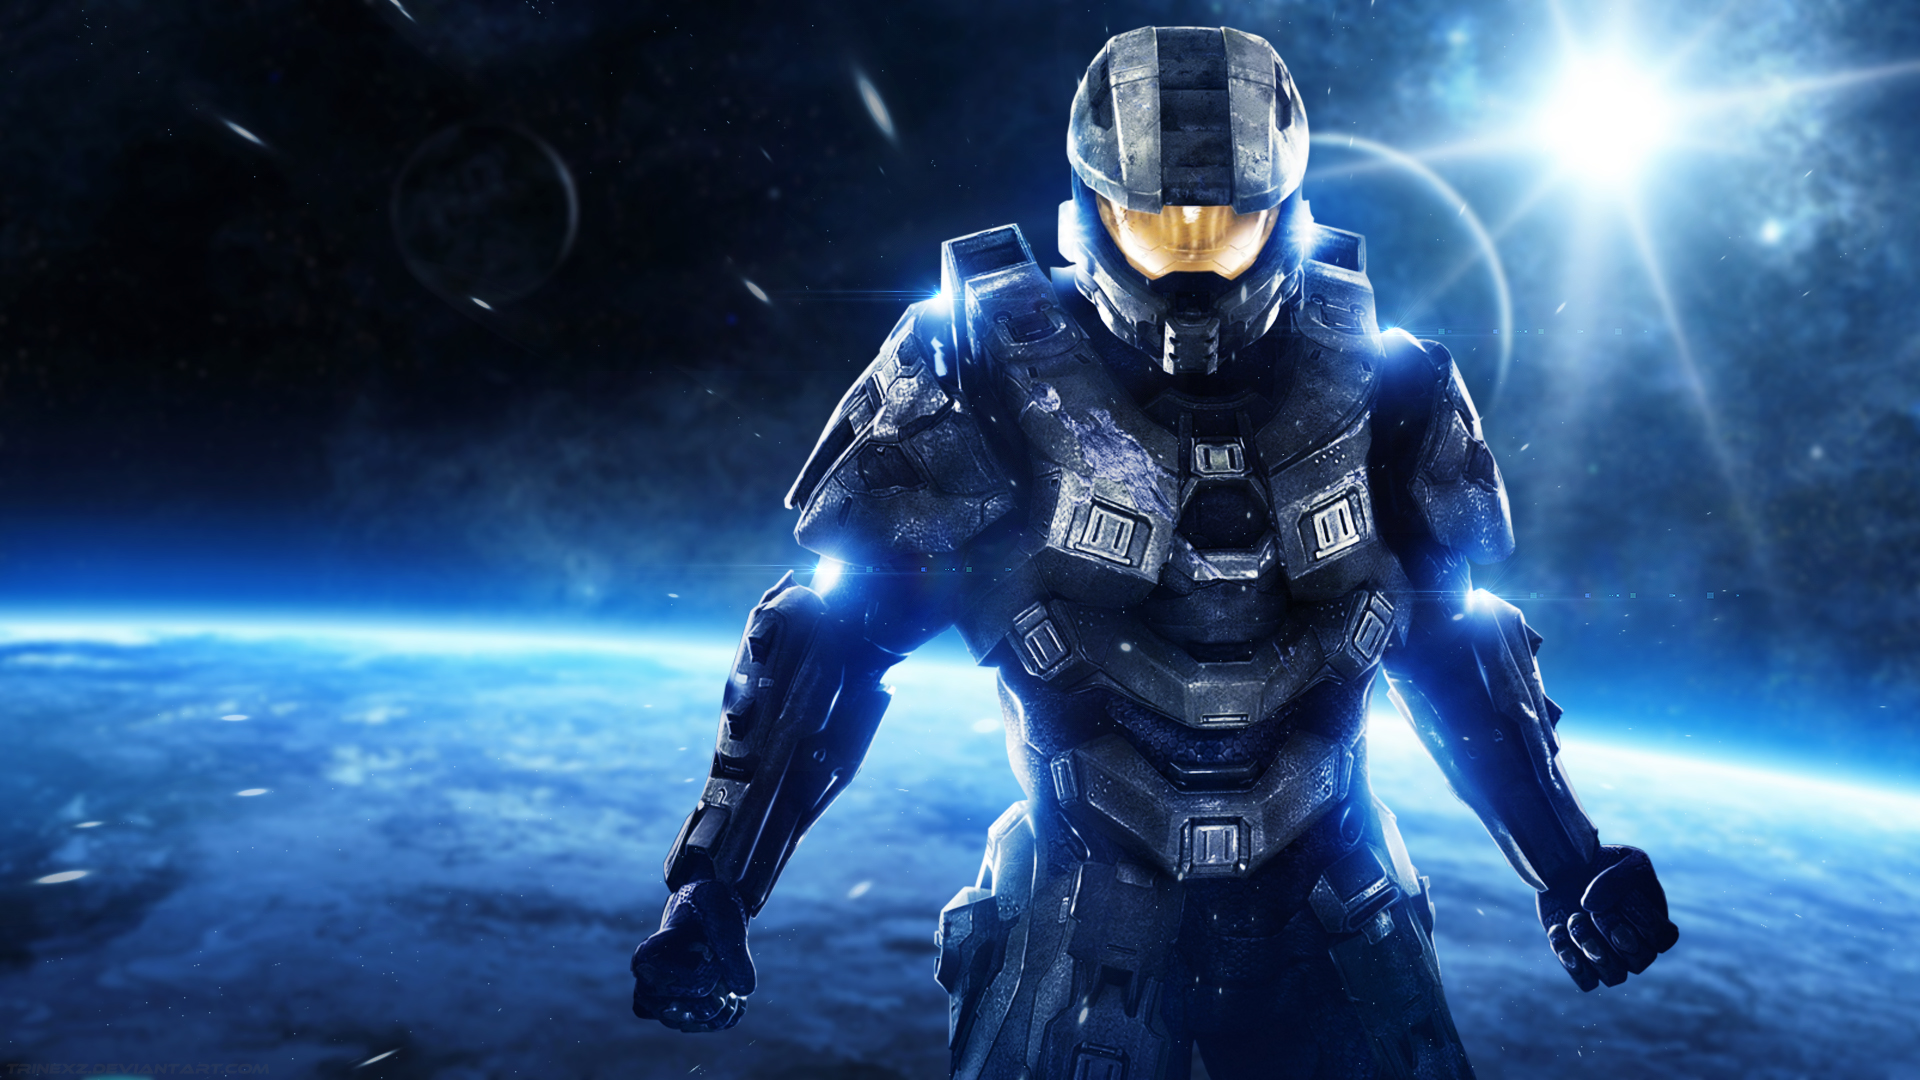 Halo Master Chief IPhone Wallpaper  IPhone Wallpapers  iPhone Wallpapers